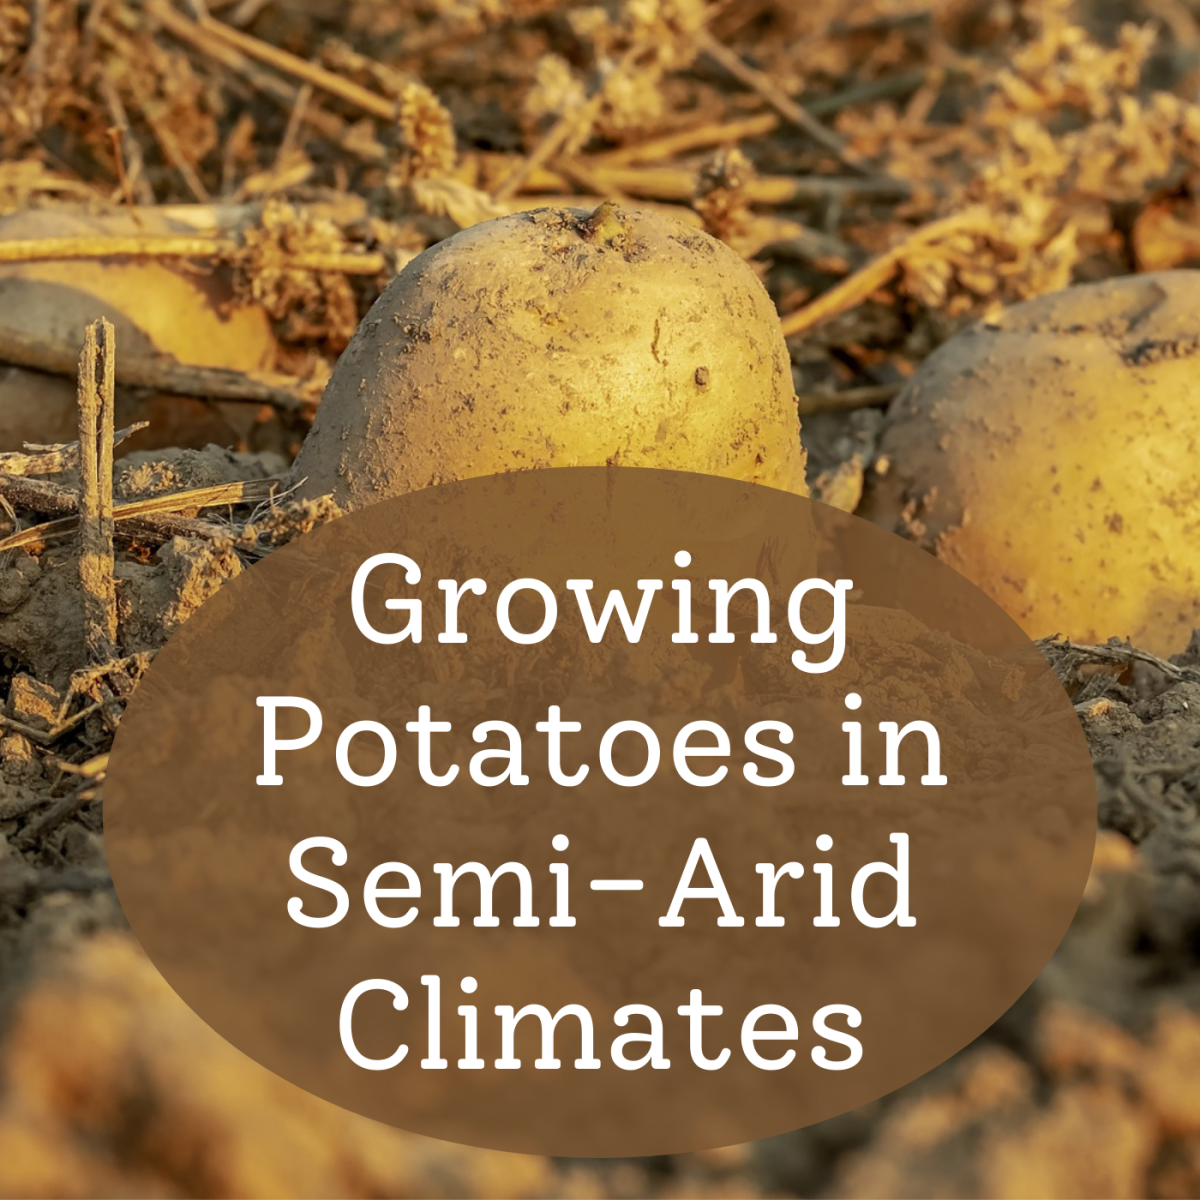 Can you grow potatoes in the desert? Follow along with my gardening efforts!